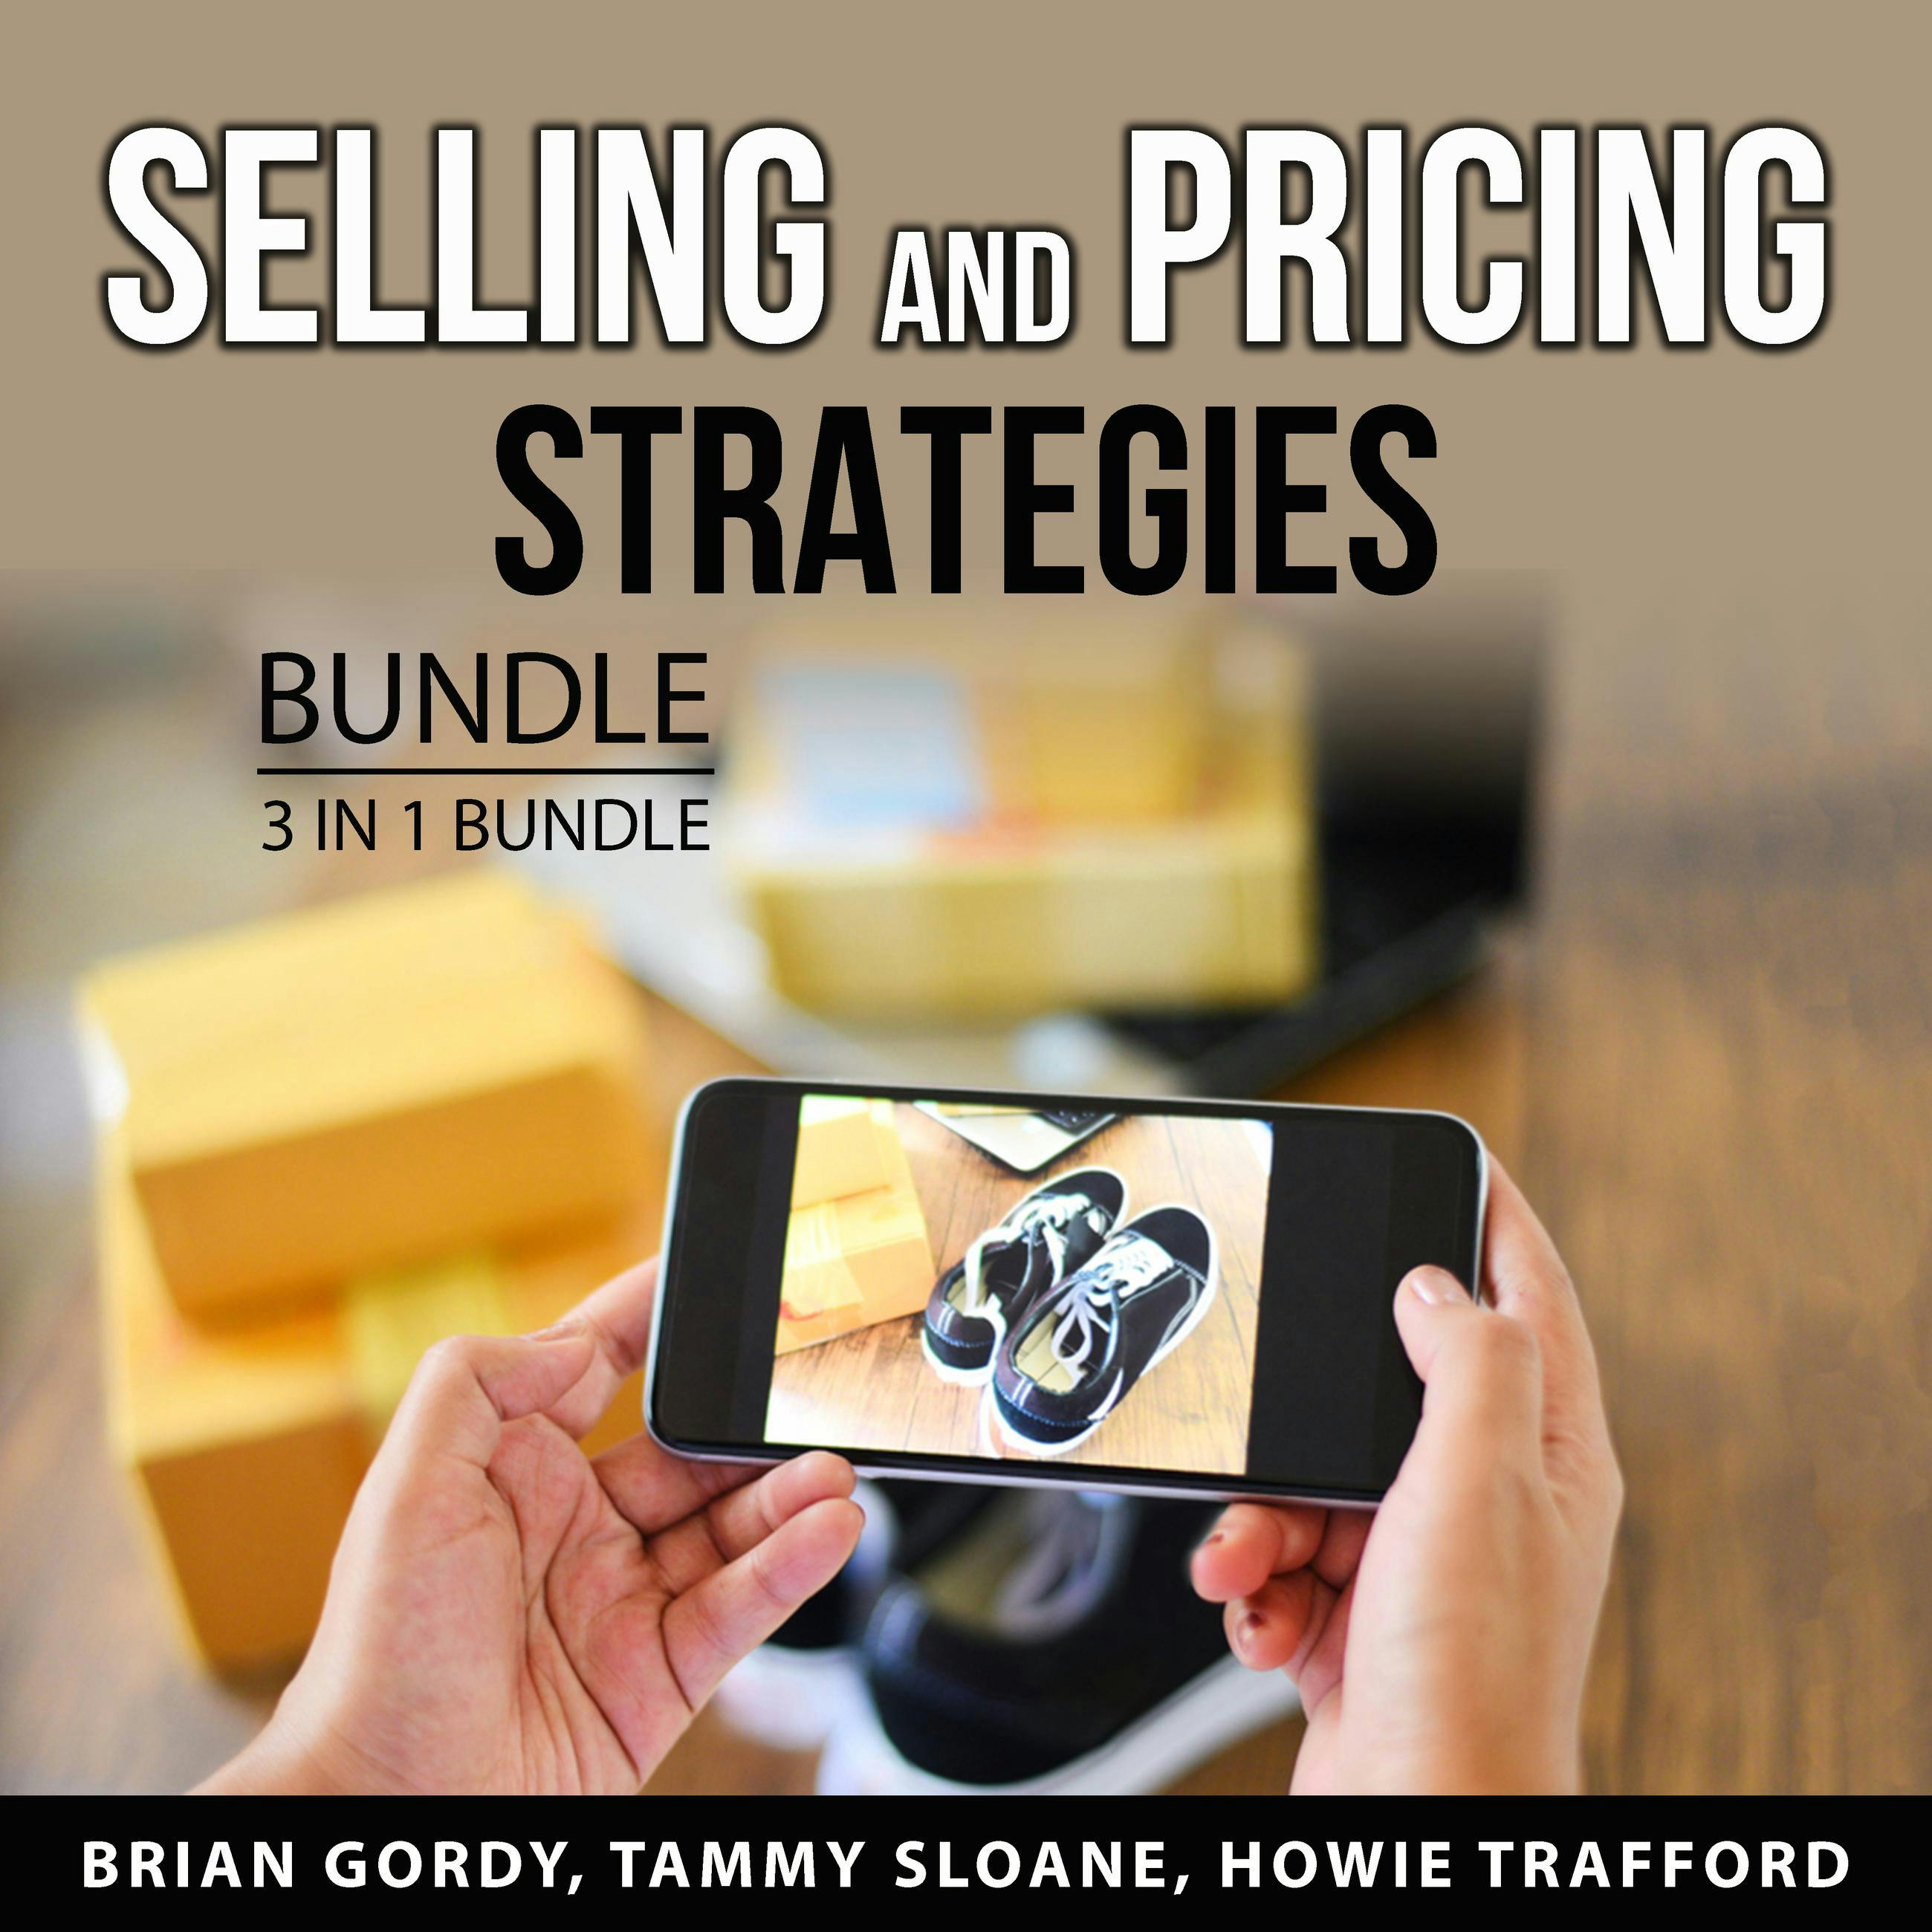 Selling and Pricing Strategies Bundle, 3 in 1 Bundle: Pricing Strategies, Smart Selling Strategies, and How to Create a Bestseller - Brian Gordy, Howie Trafford, Tammy Sloane